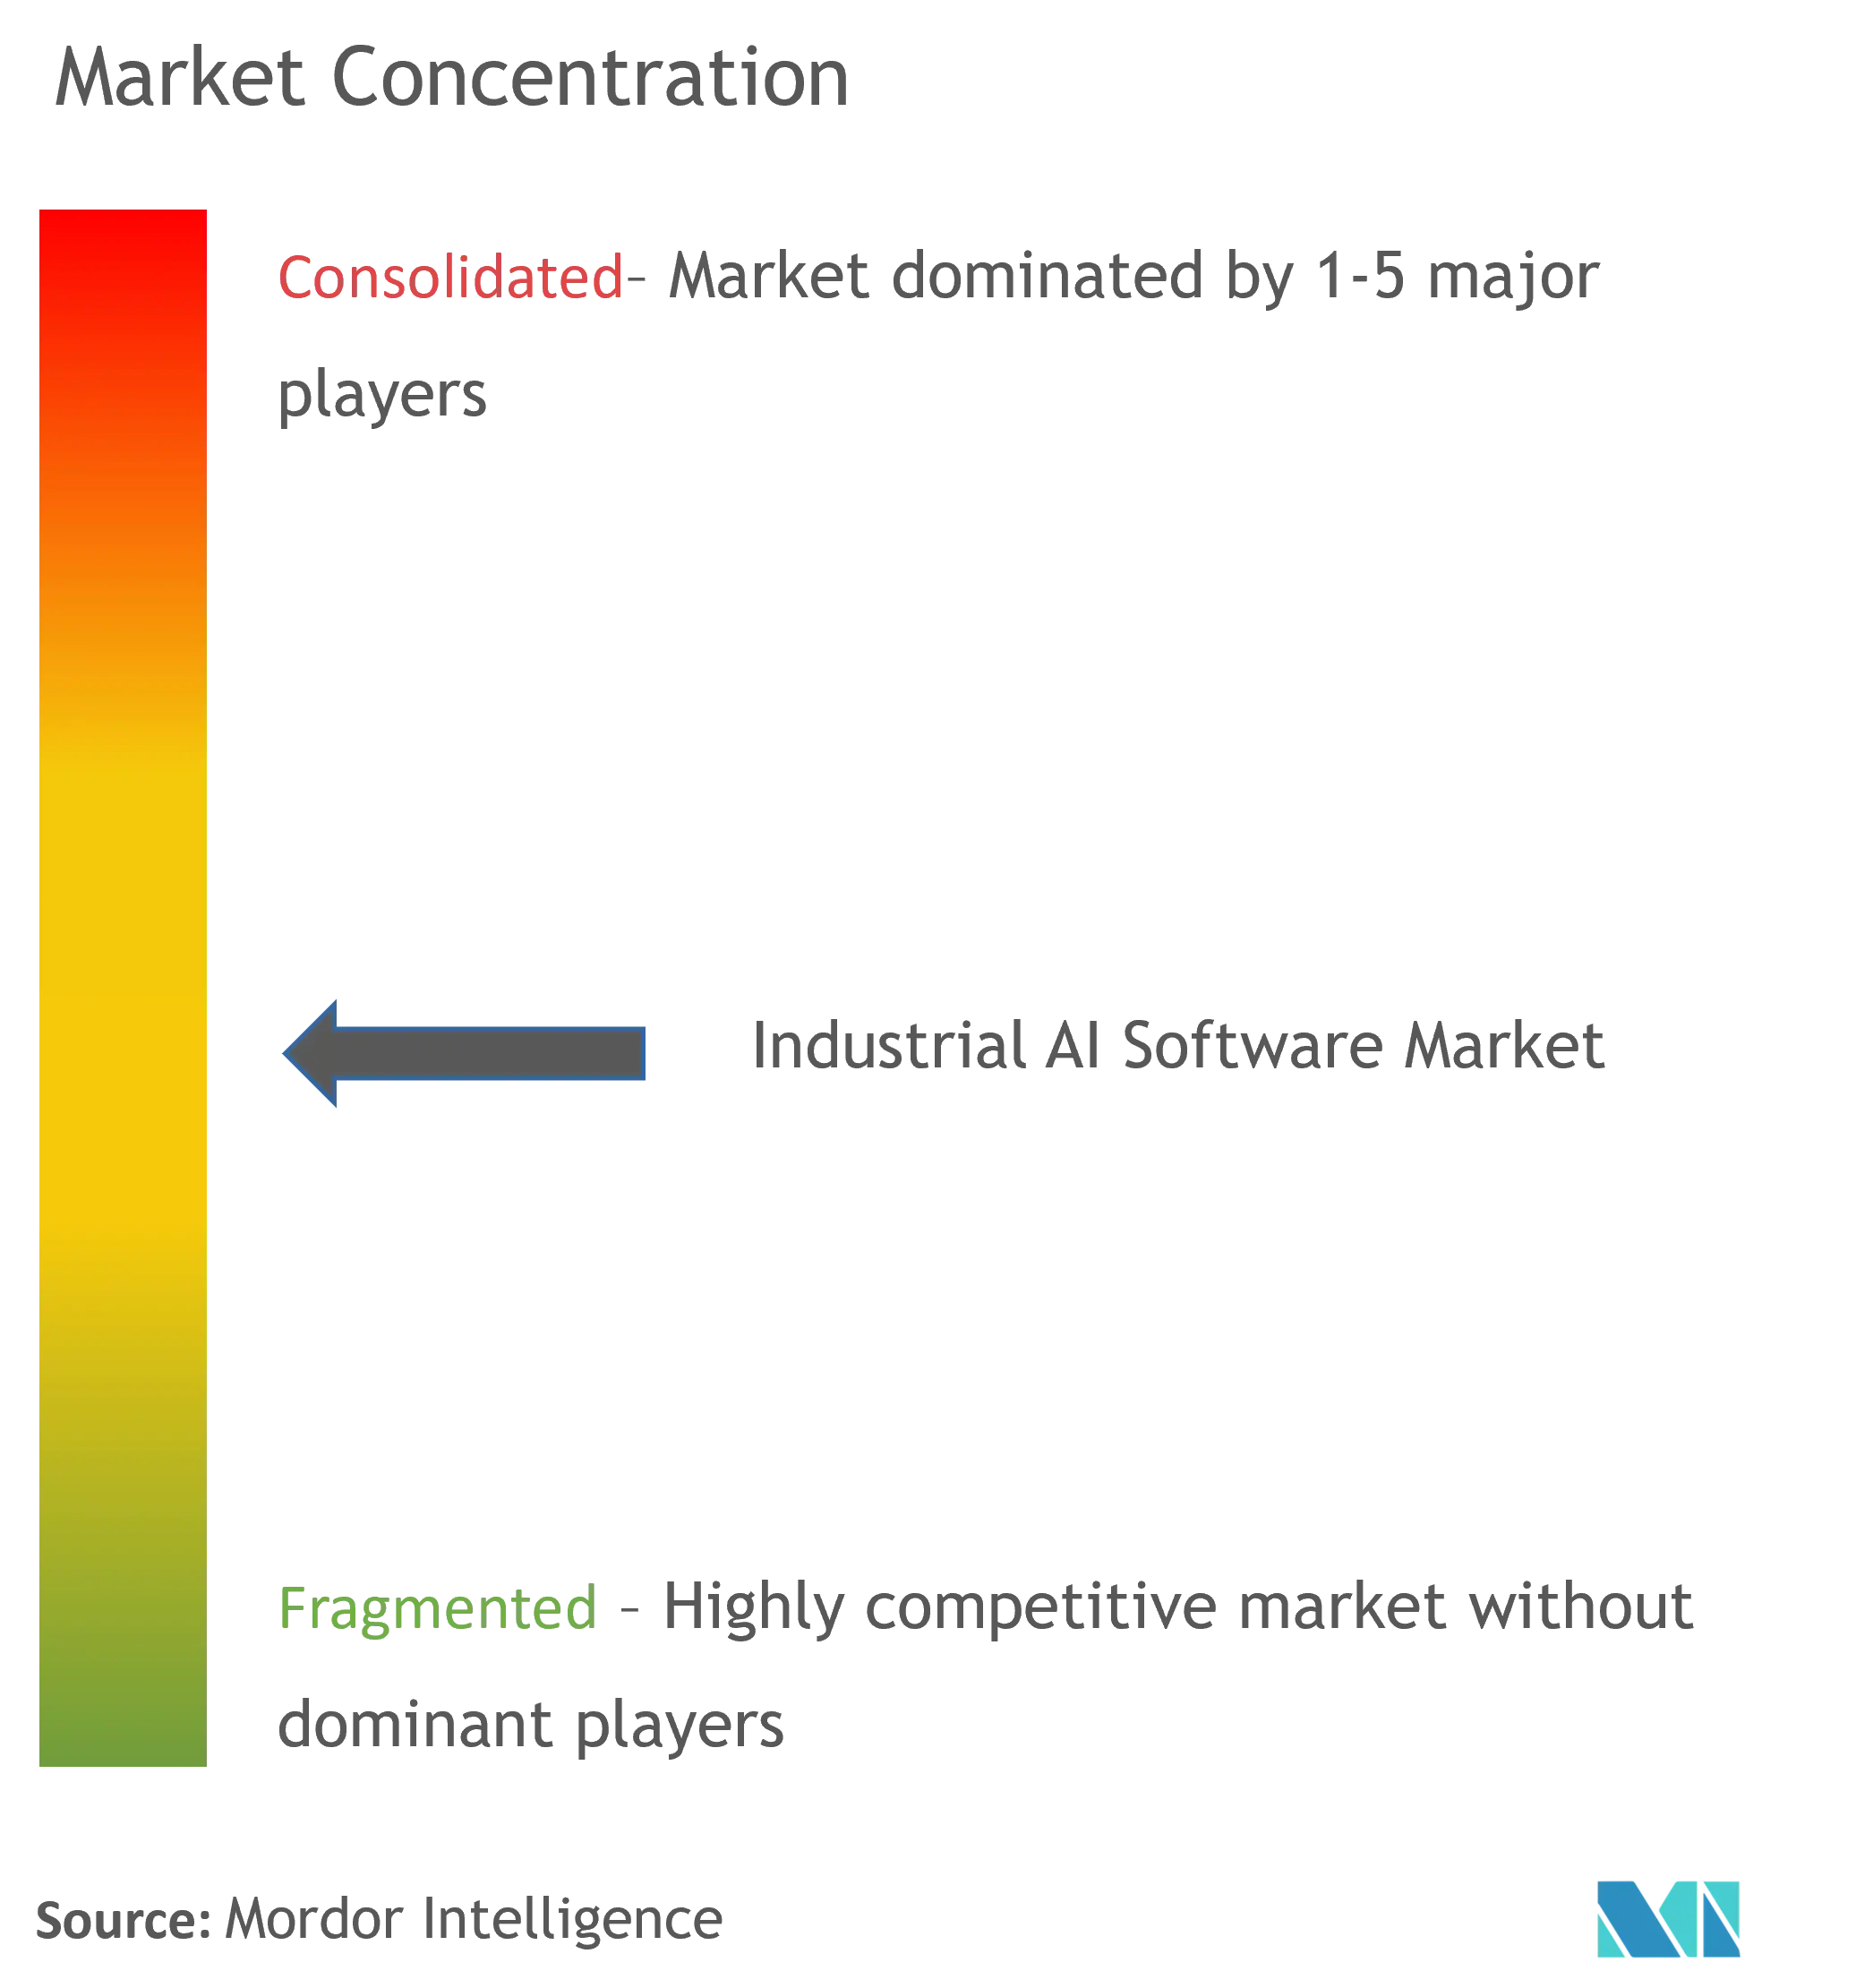 Industrial AI Software Market Concentration